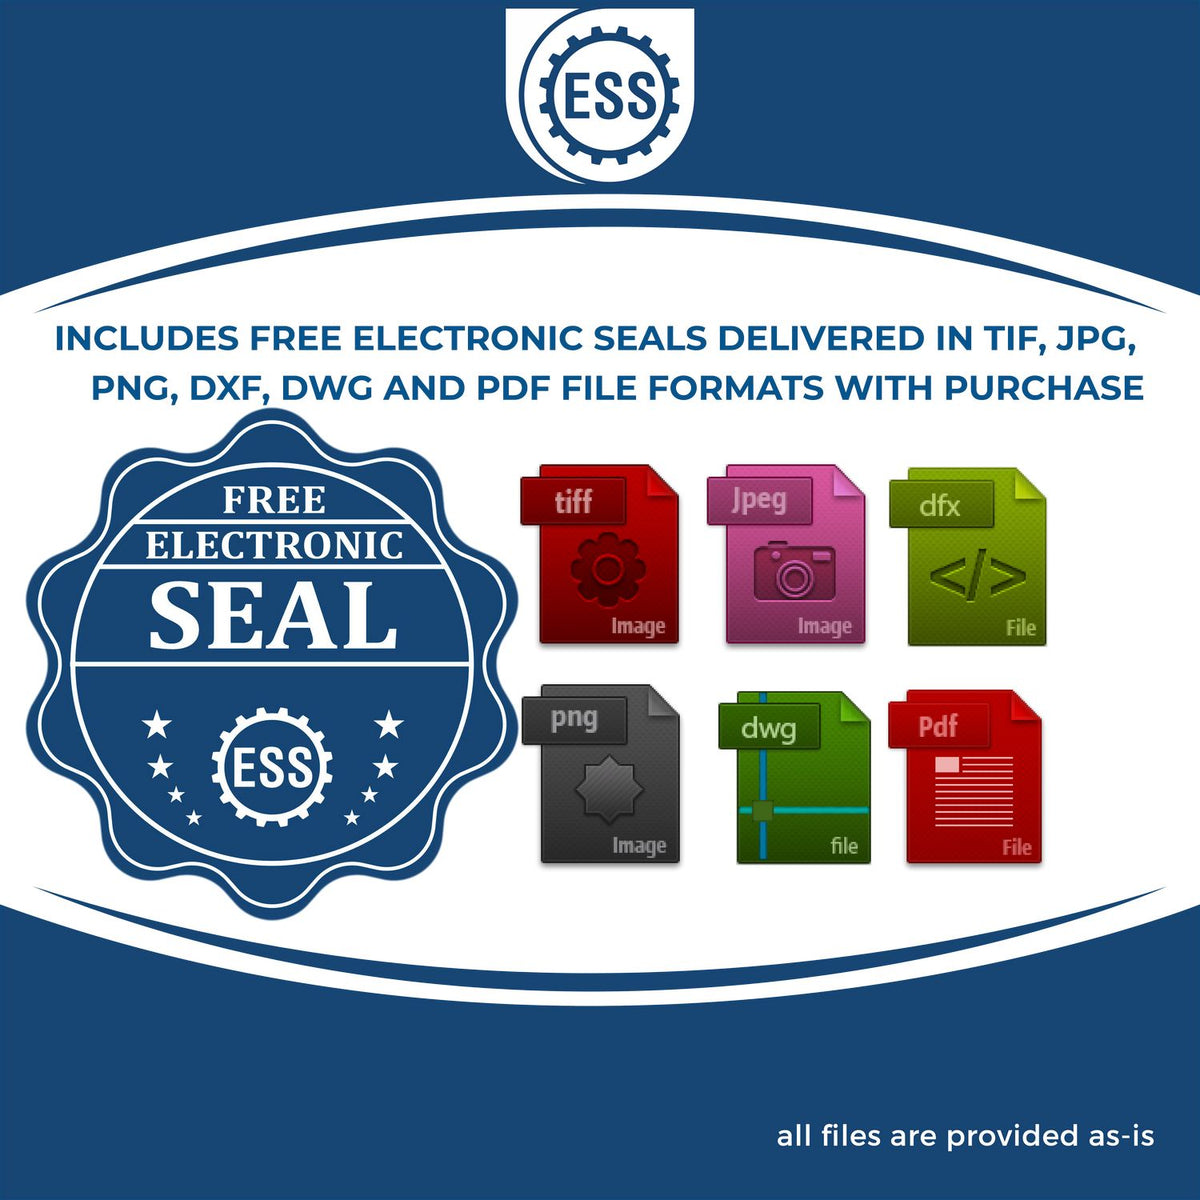 An infographic for the free electronic seal for the Premium MaxLight Pre-Inked North Carolina Landscape Architectural Stamp illustrating the different file type icons such as DXF, DWG, TIF, JPG and PNG.